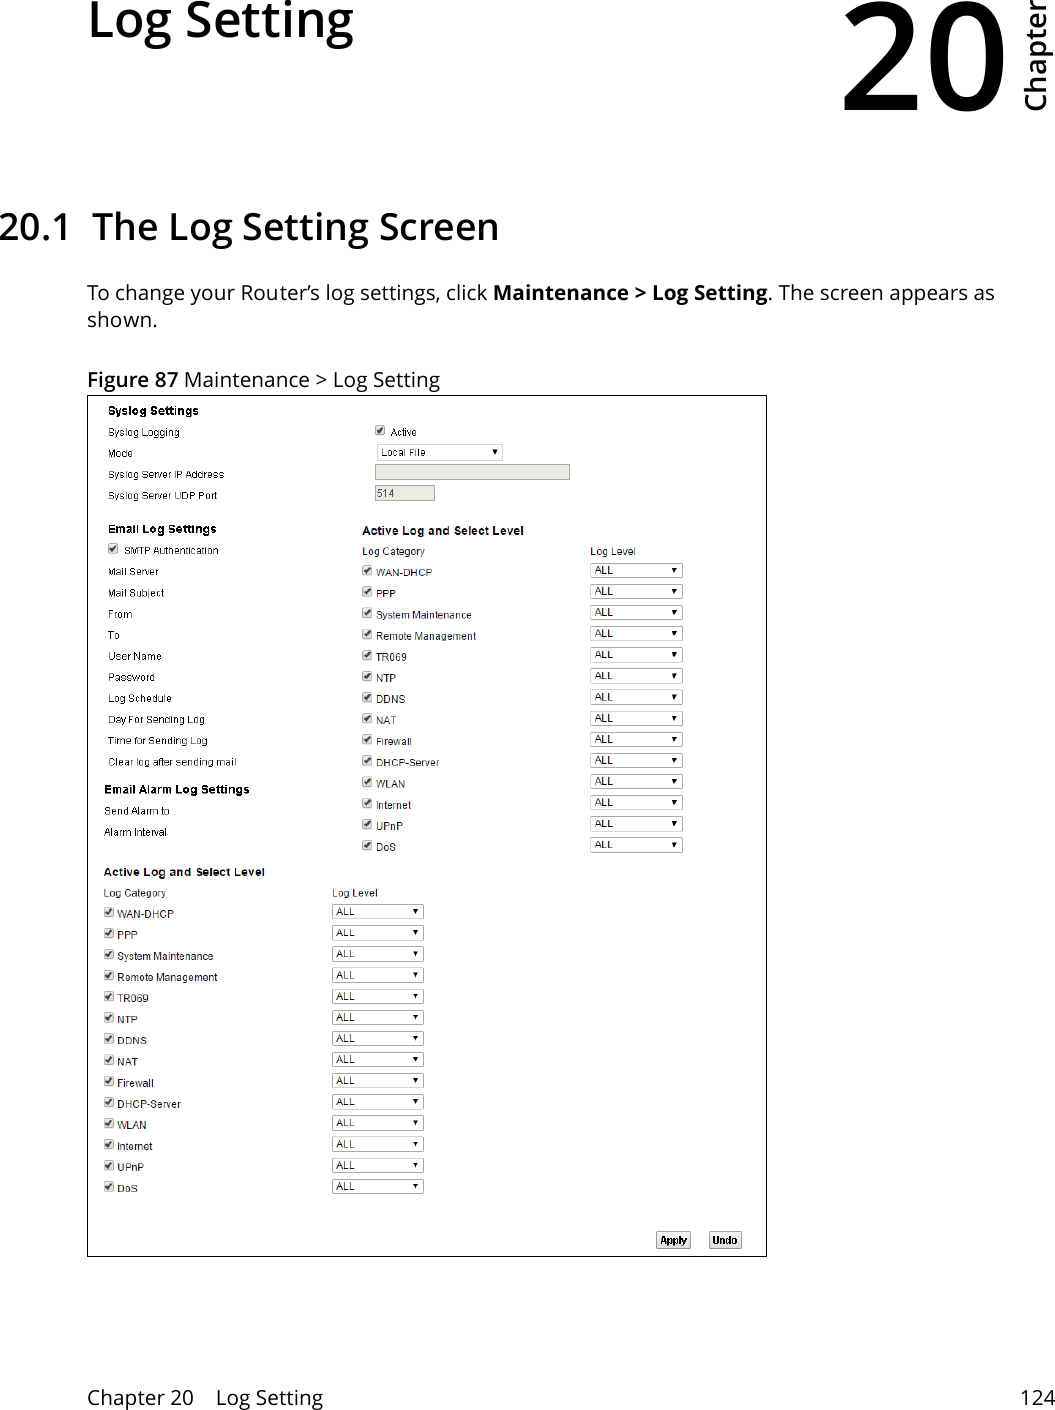 20Chapter Chapter 20    Log Setting 124CHAPTER 20 Chapter 20 Log Setting 20.1  The Log Setting ScreenTo change your Router’s log settings, click Maintenance &gt; Log Setting. The screen appears as shown.Figure 87 Maintenance &gt; Log Setting